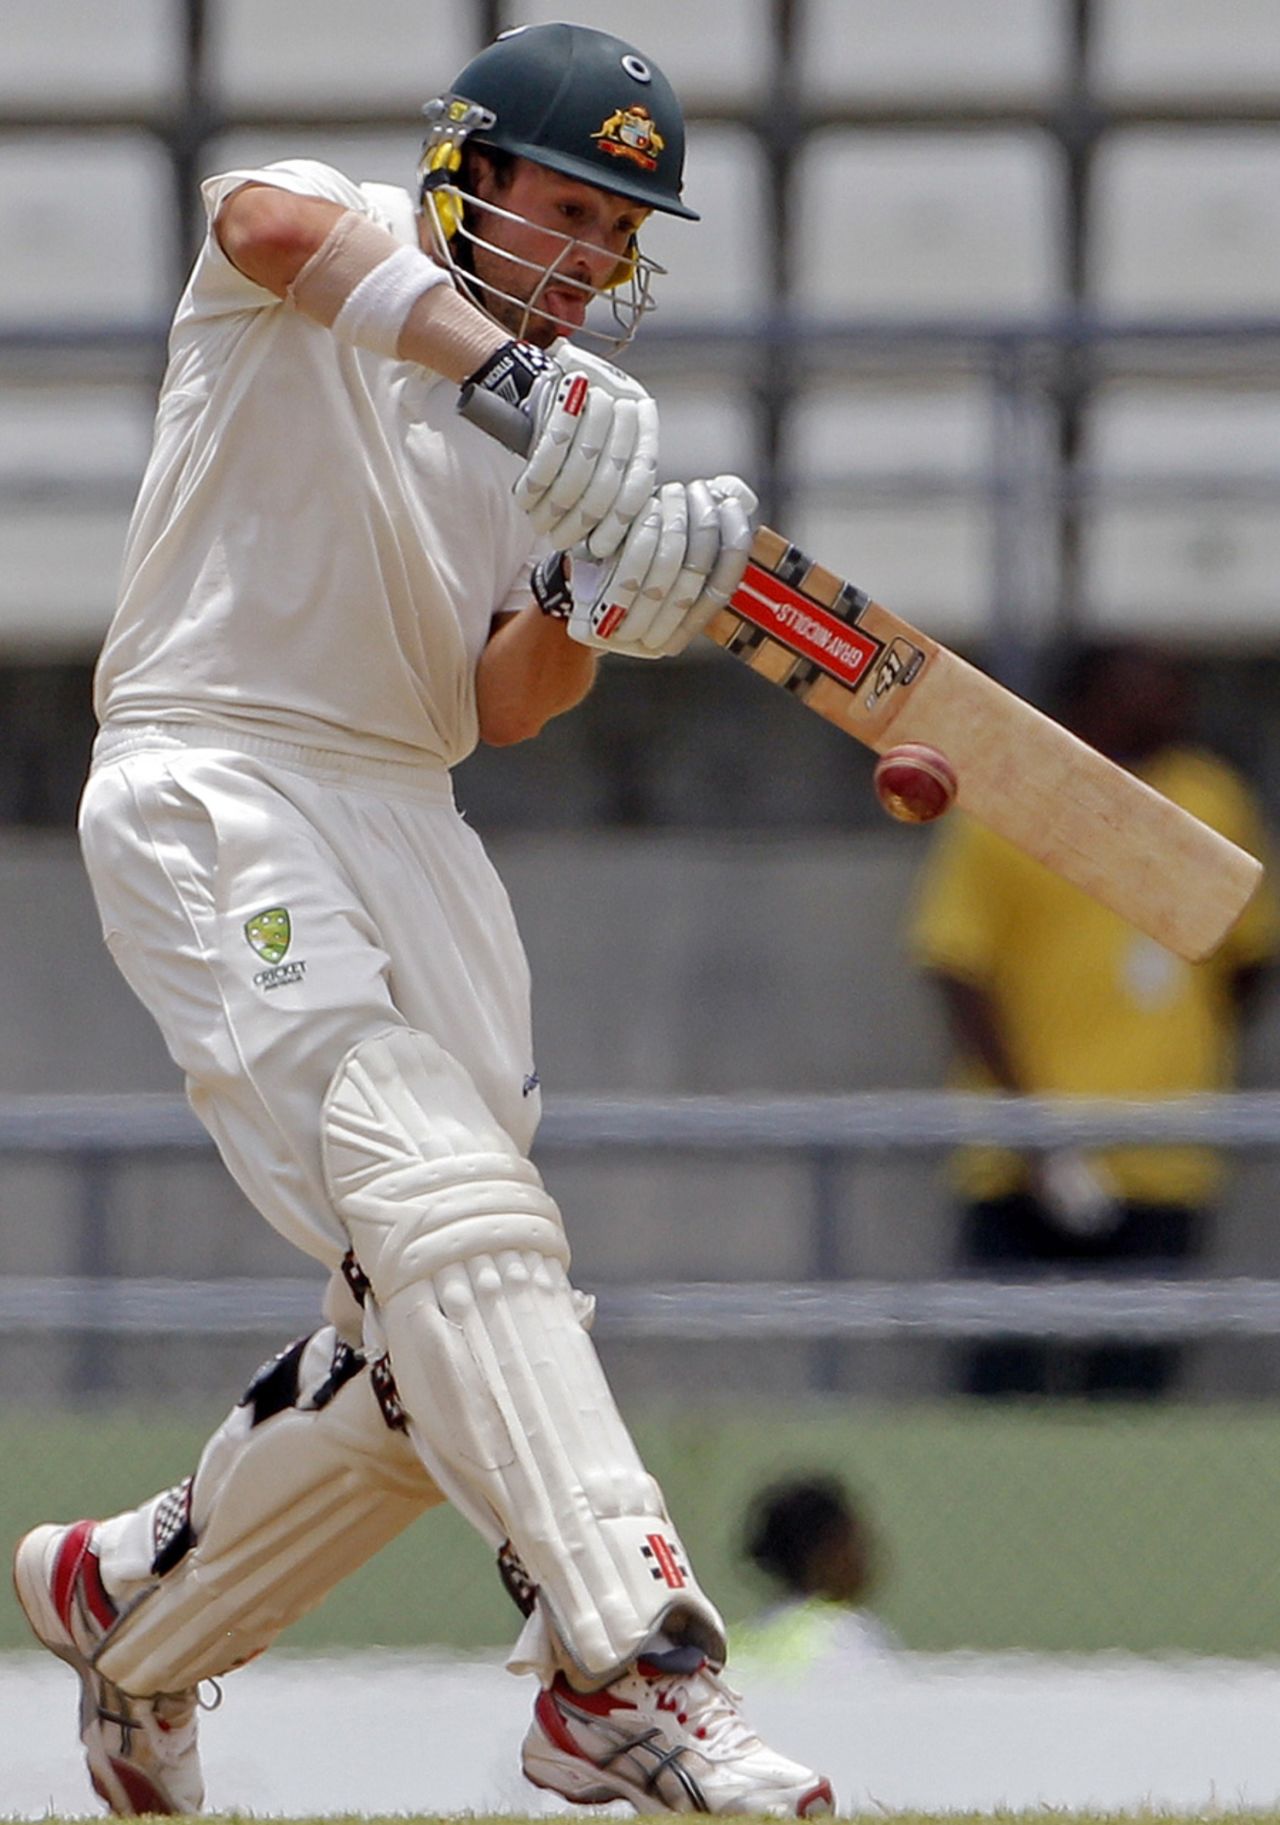 Ed Cowan goes for the pull, West Indies v Australia, 3rd Test, Roseau, 3rd day, April 25, 2012